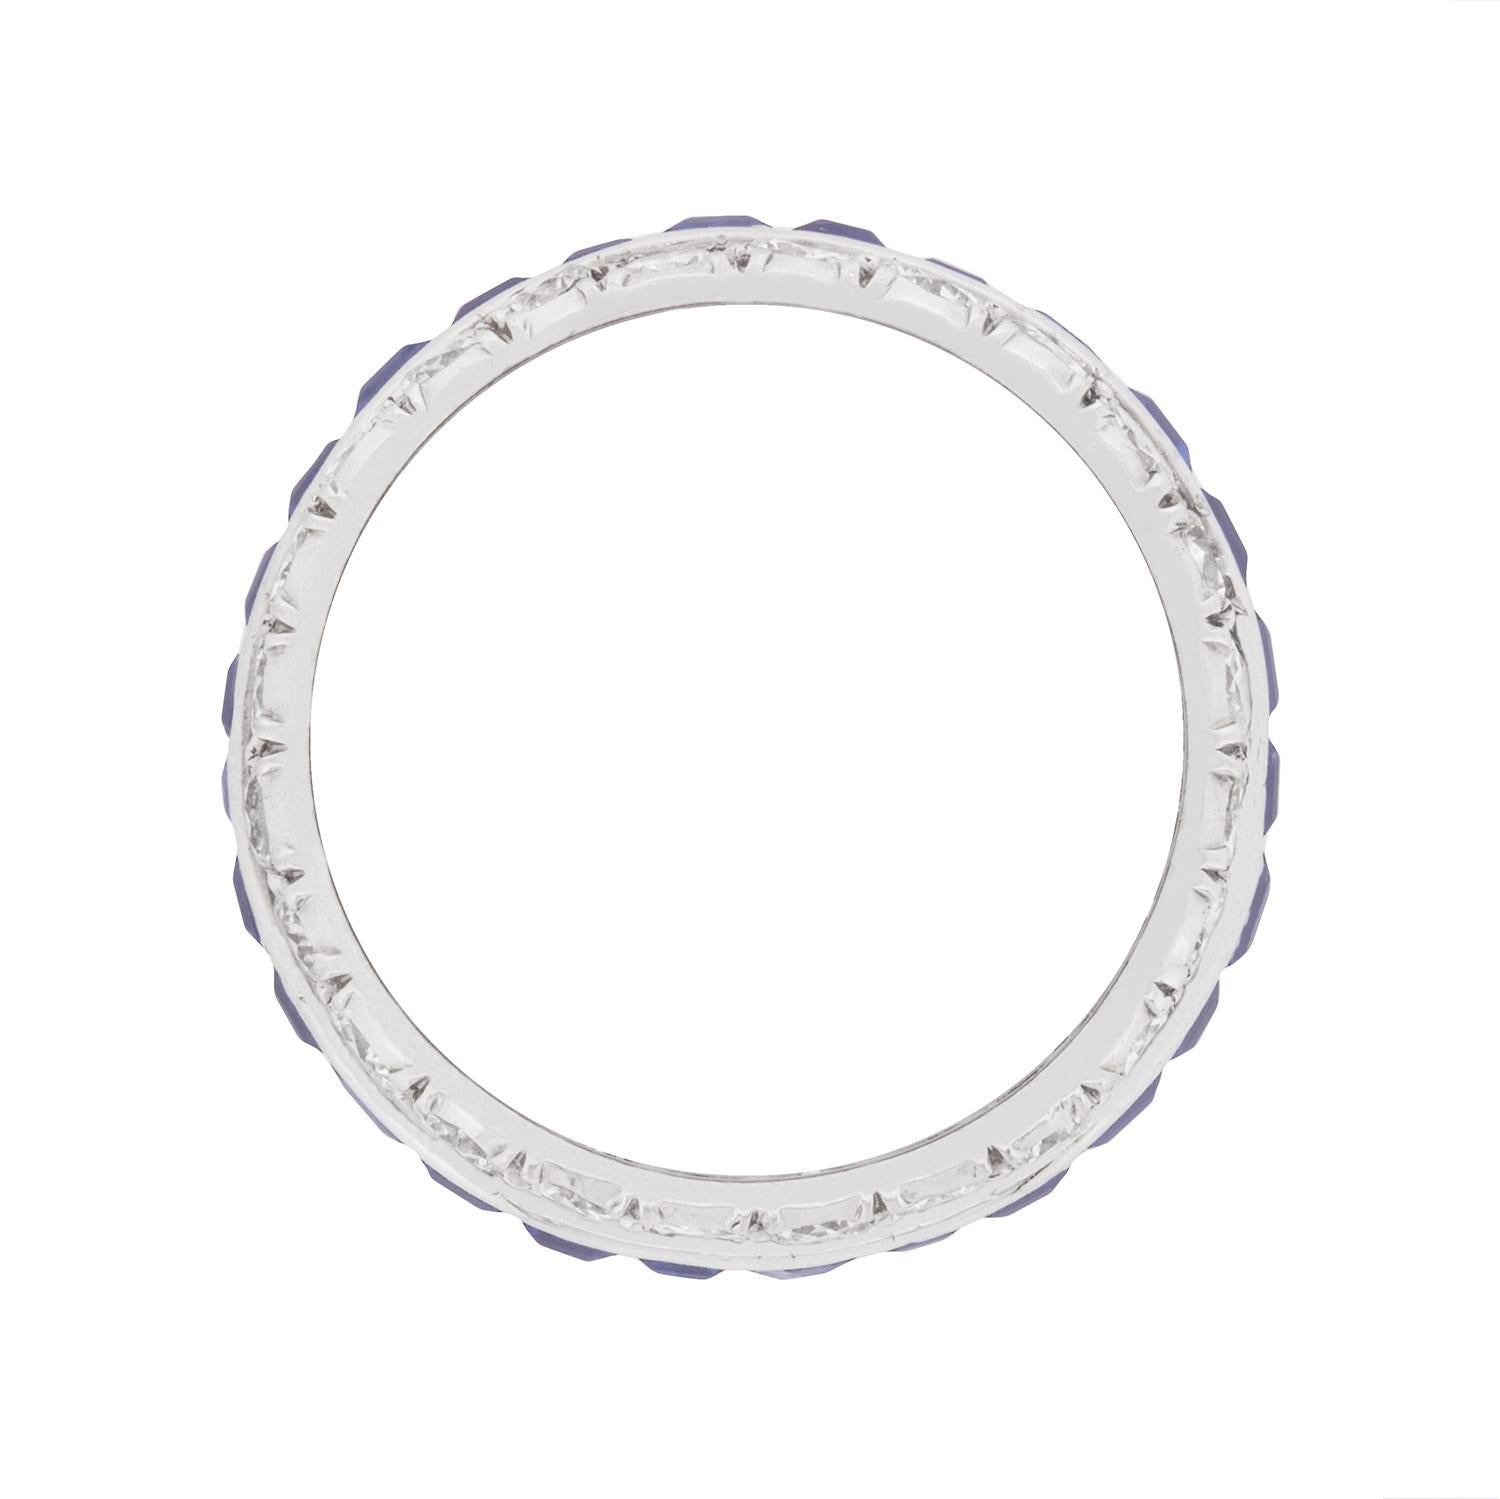 This beautifully made eternity ring boasts a total carat weight of 2.70 carat's worth of deep blue sapphires. They are baguettes cuts, all hand crafted and expertly tension set to calibrate with one another. These stunning gemstones have been